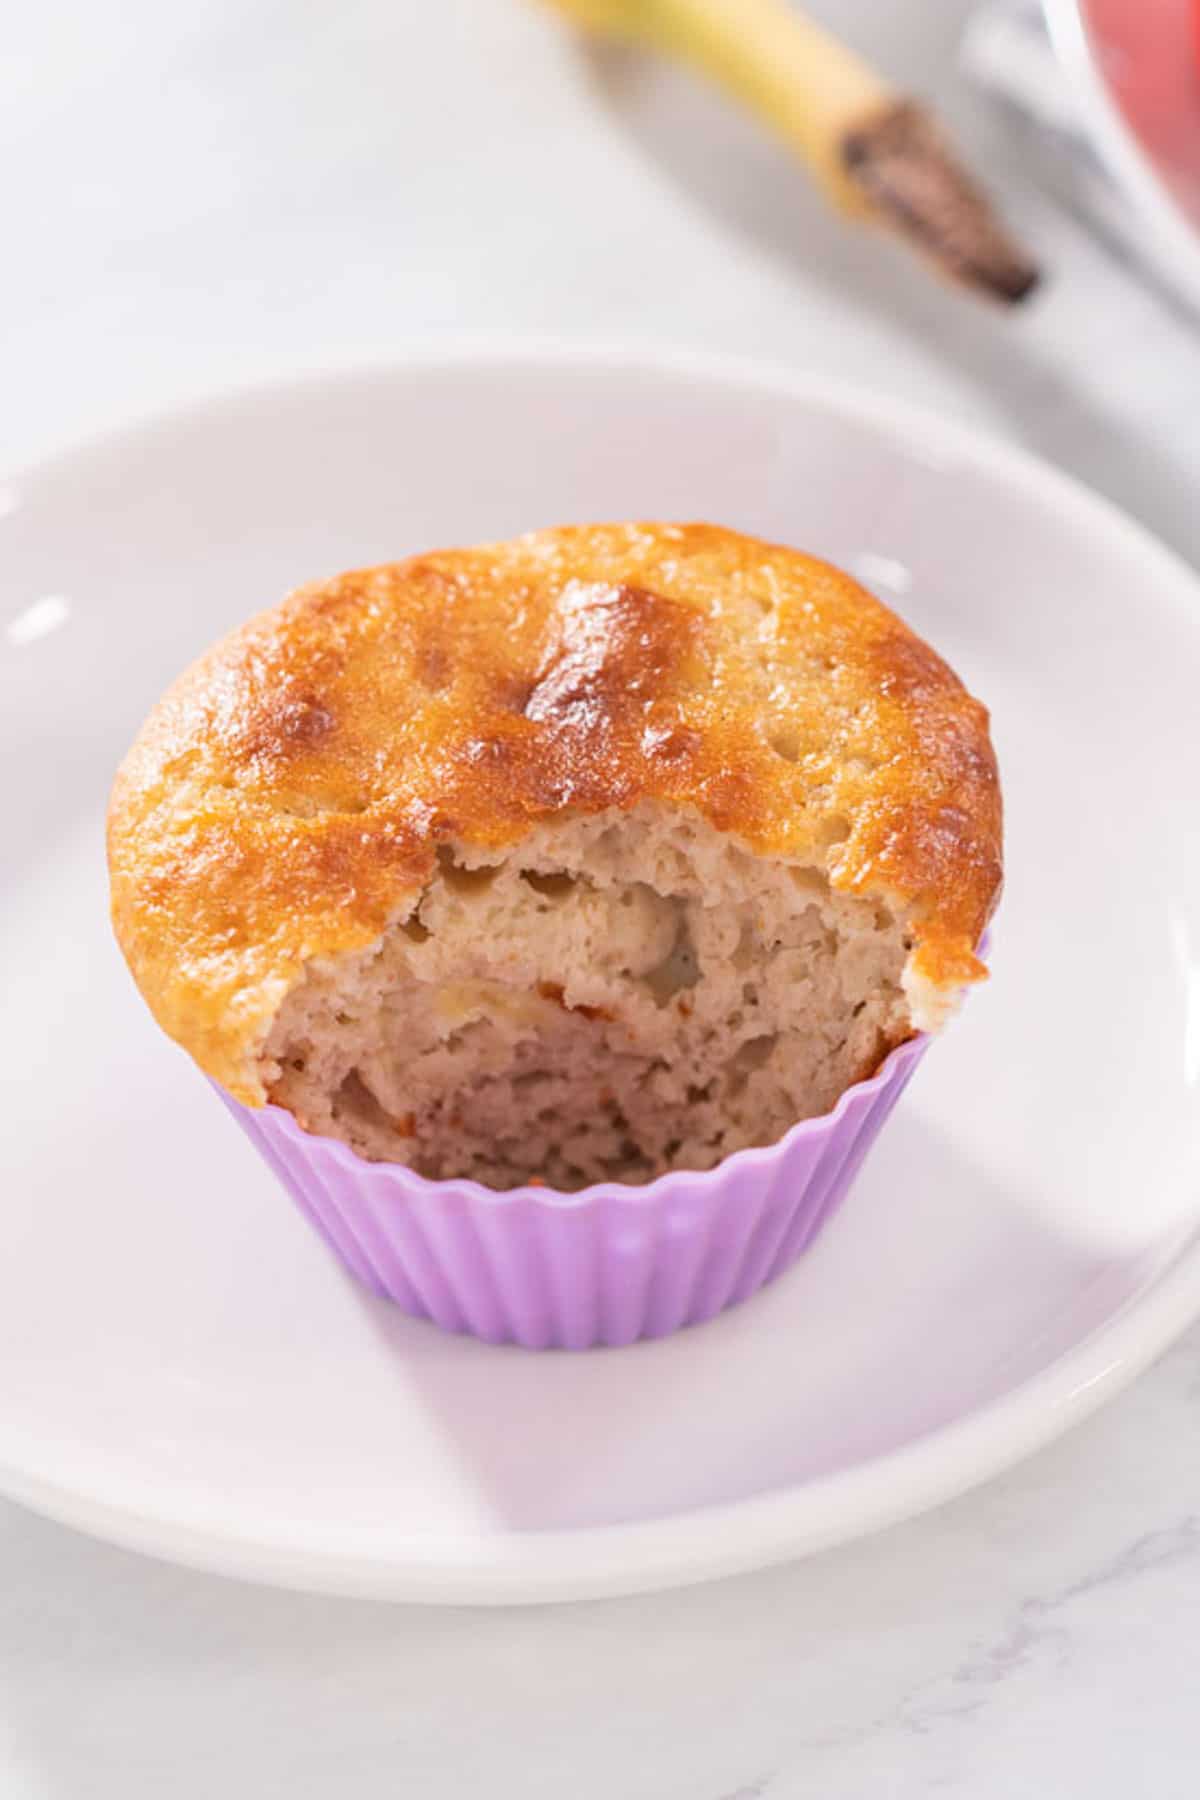 A muffin inside of a silicone liner, with a portion removed.